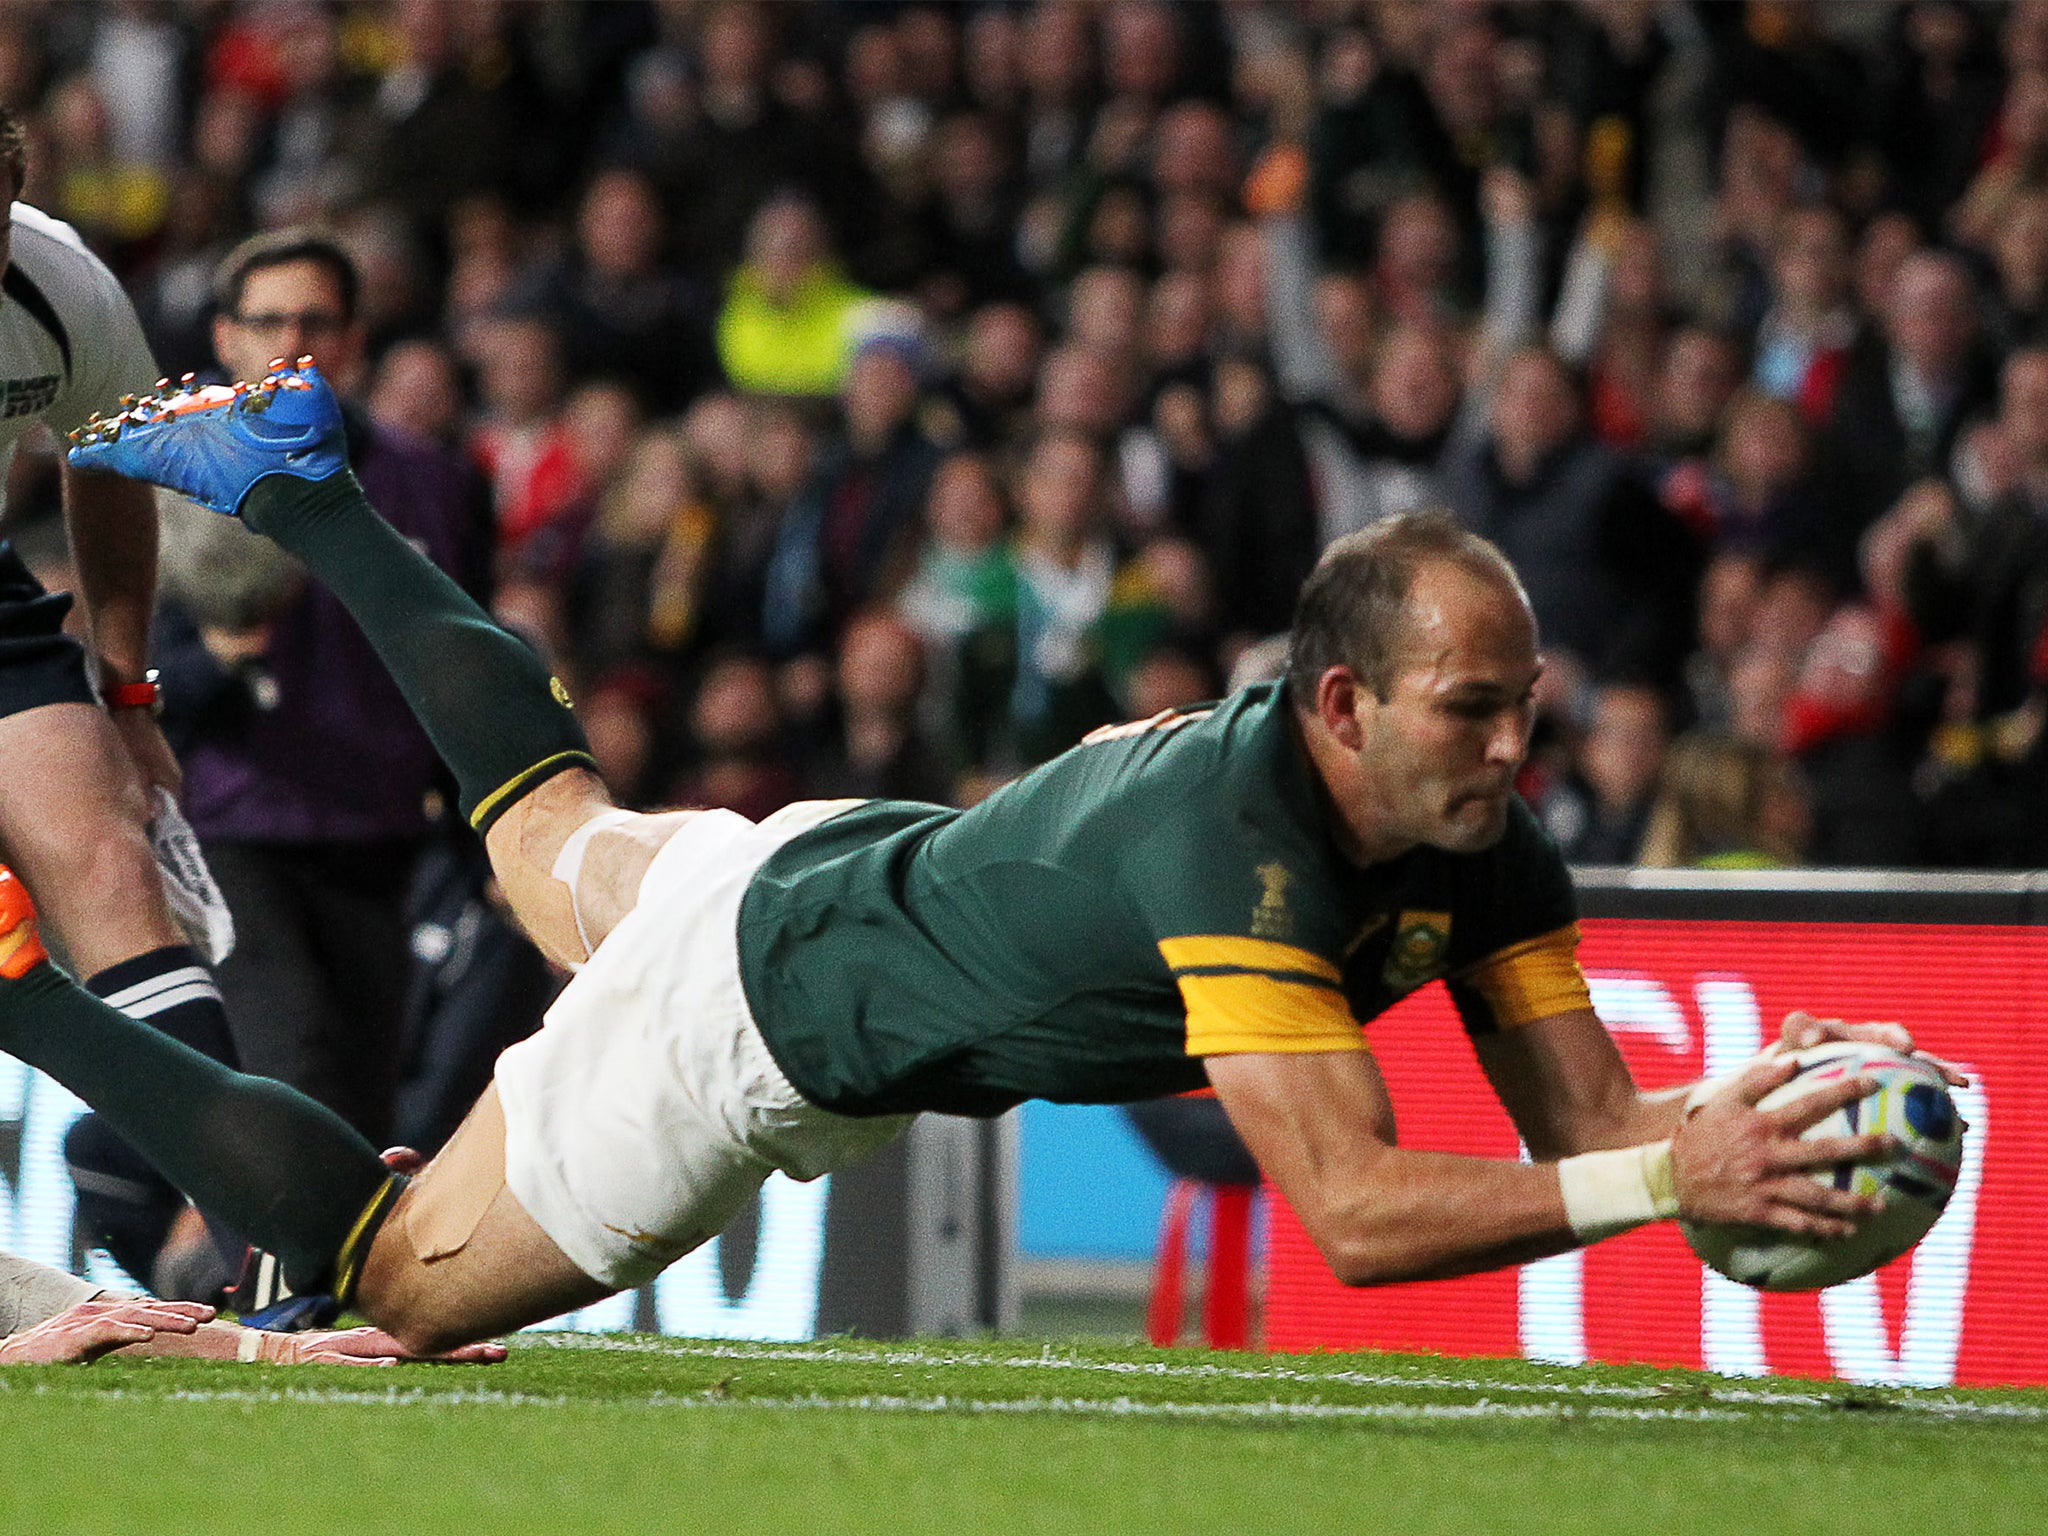 Fourie du Preez of South Africa scores a try.